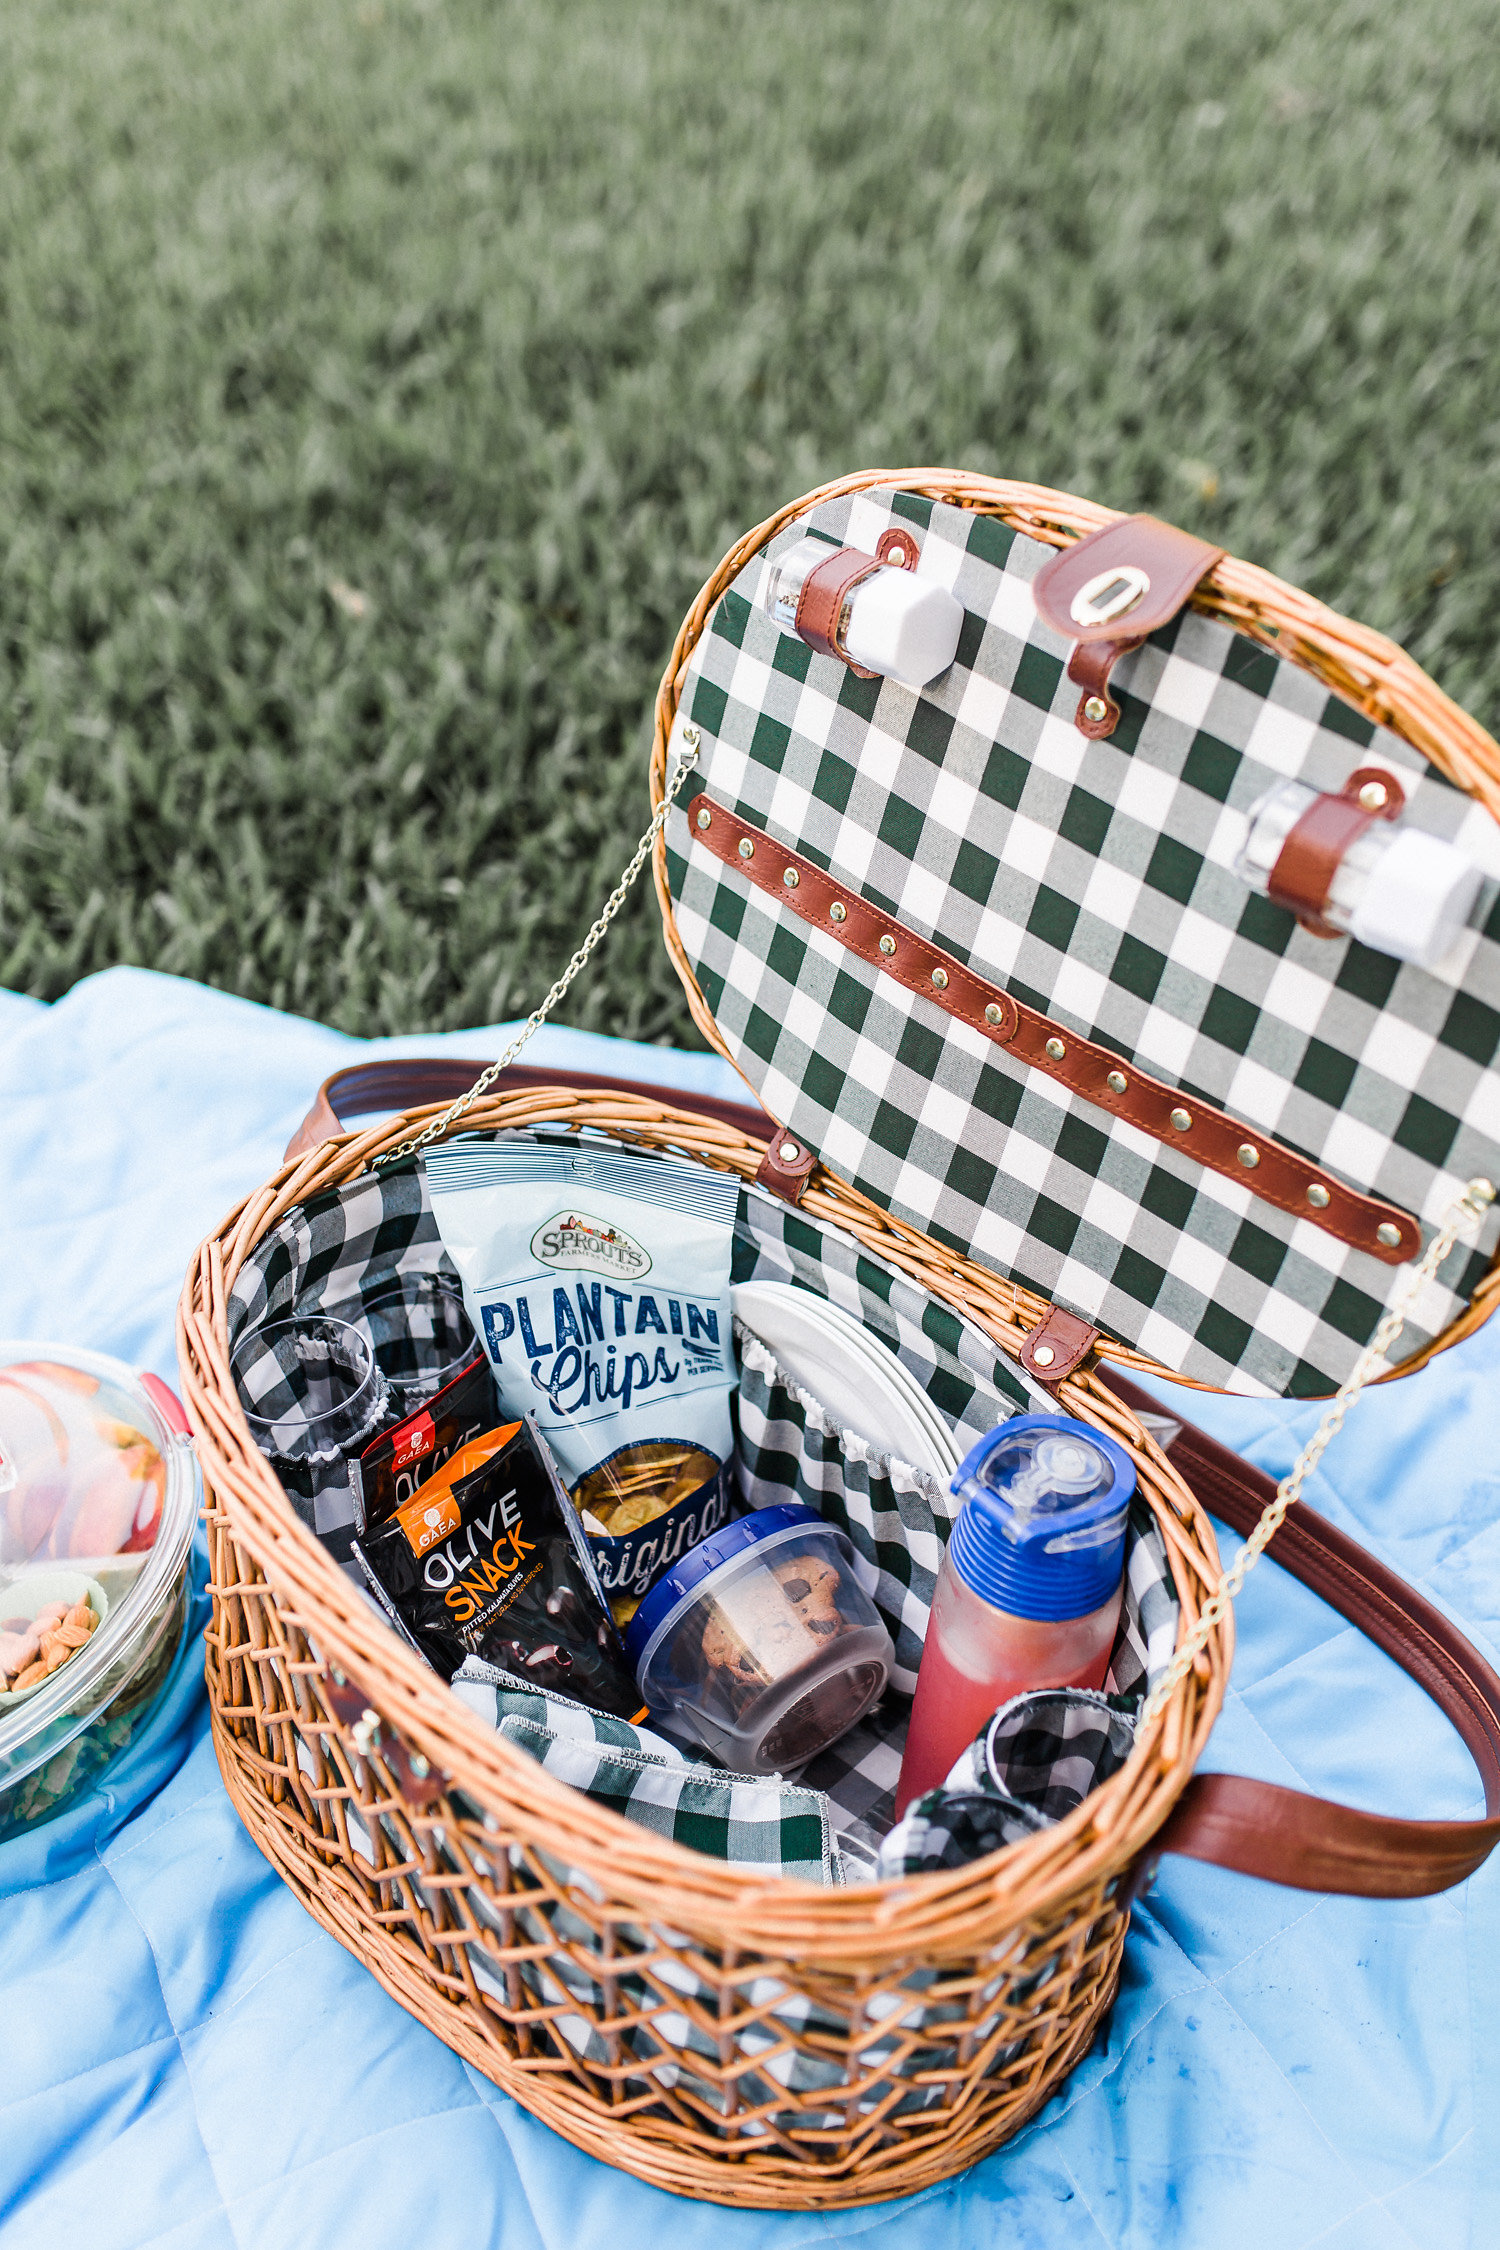 How To Pack A Healthy Paleo Friendly Picnic Basket Hsn Blogs